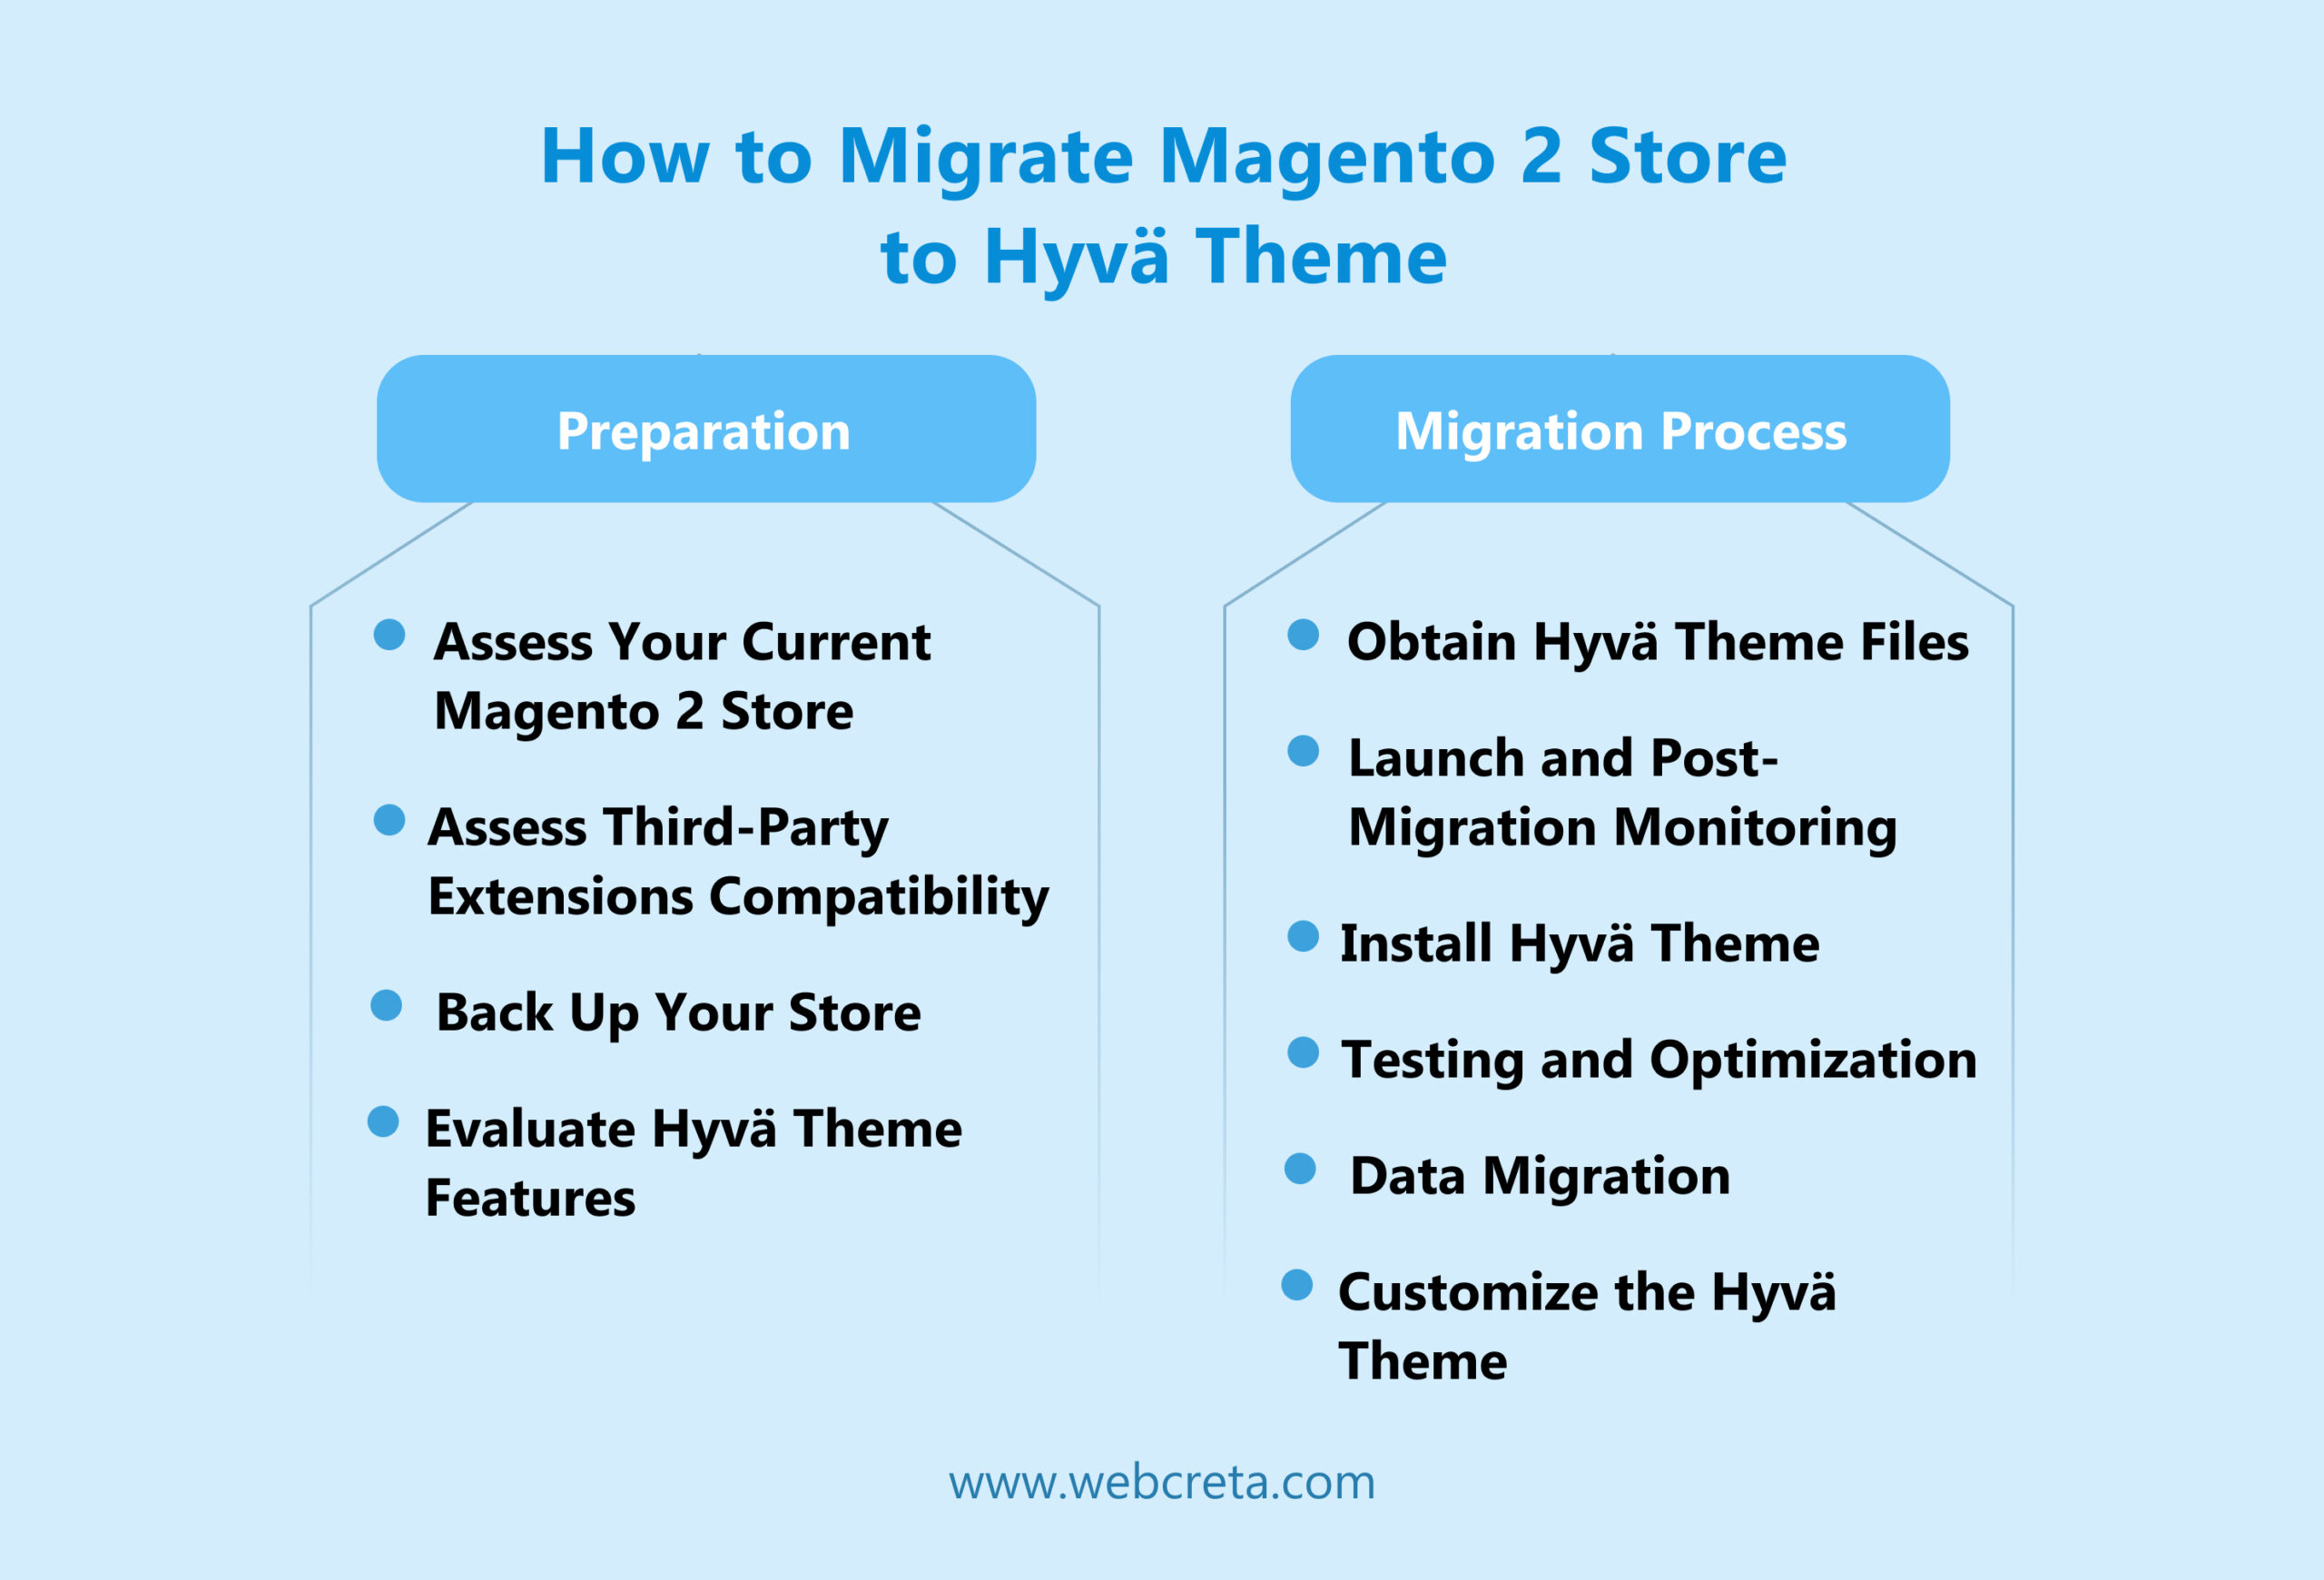 How to Migrate Magento 2 Store to Hyvä Theme